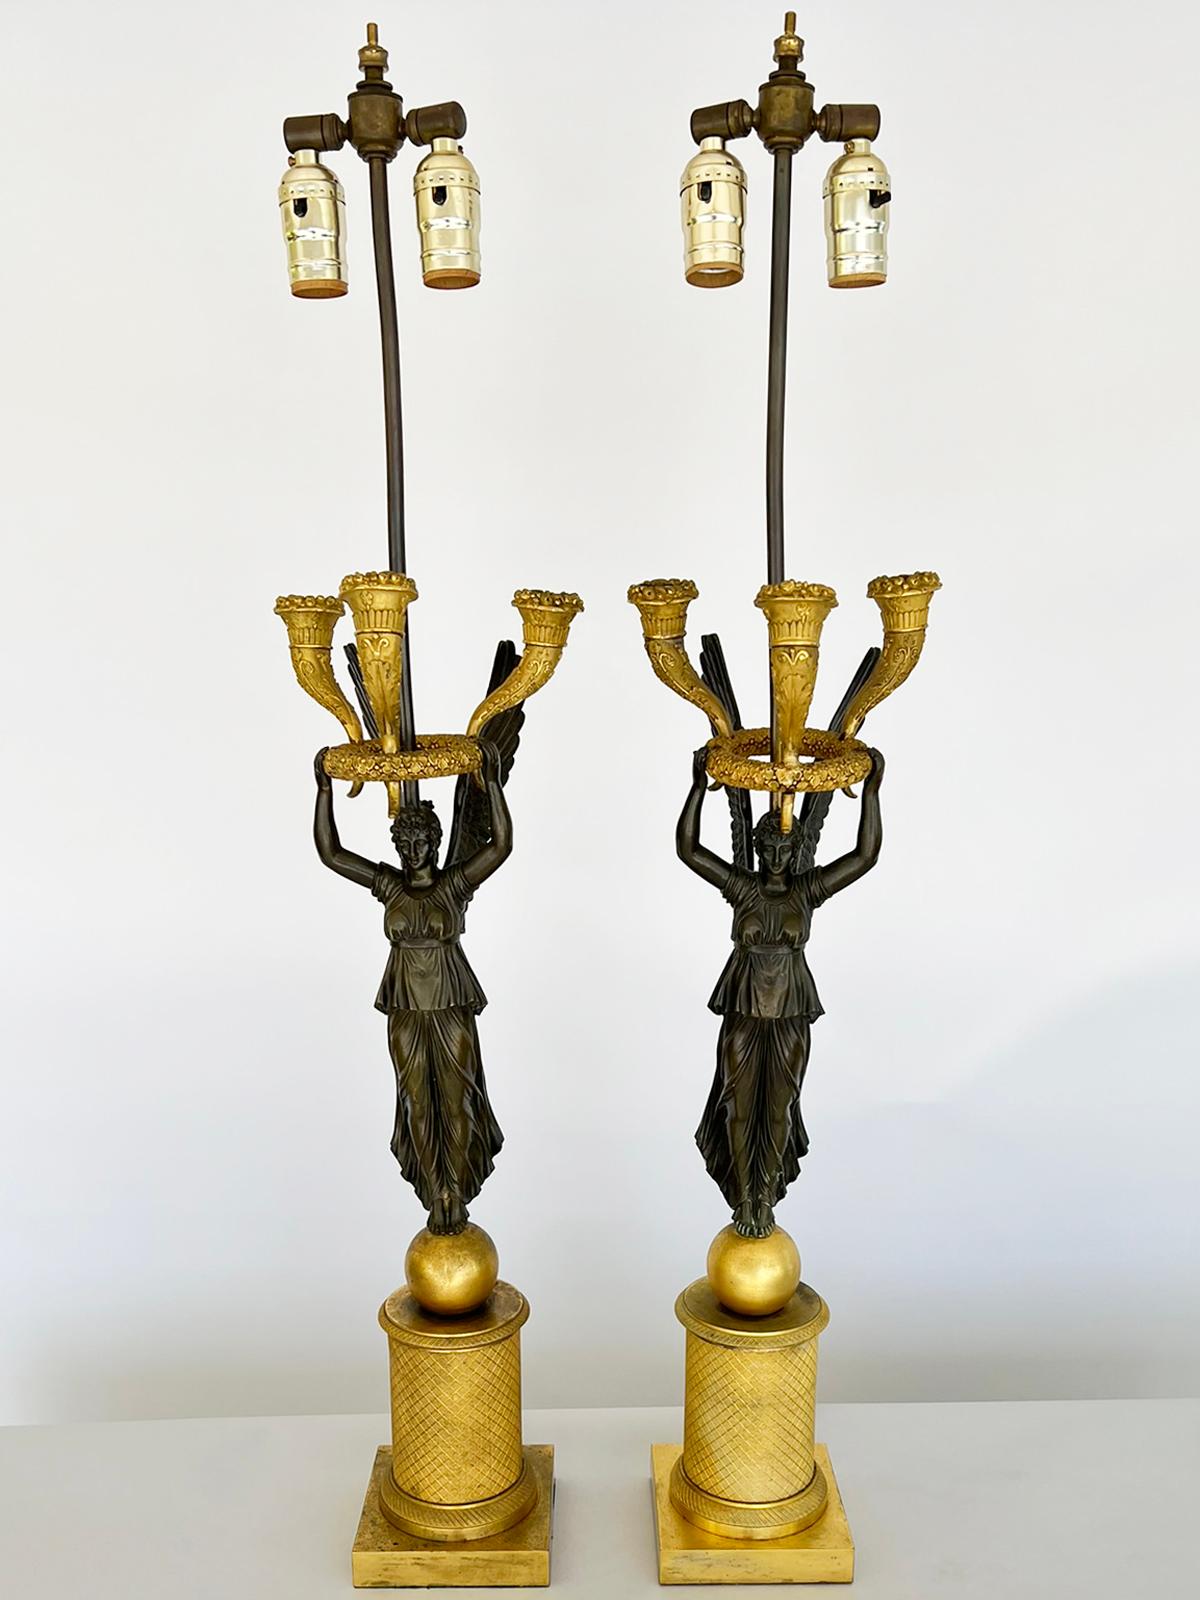 Pair of Late Empire Ormolu and Patented Bronze Figural Candelabra Lamps, C. 1815 In Good Condition For Sale In West Palm Beach, FL